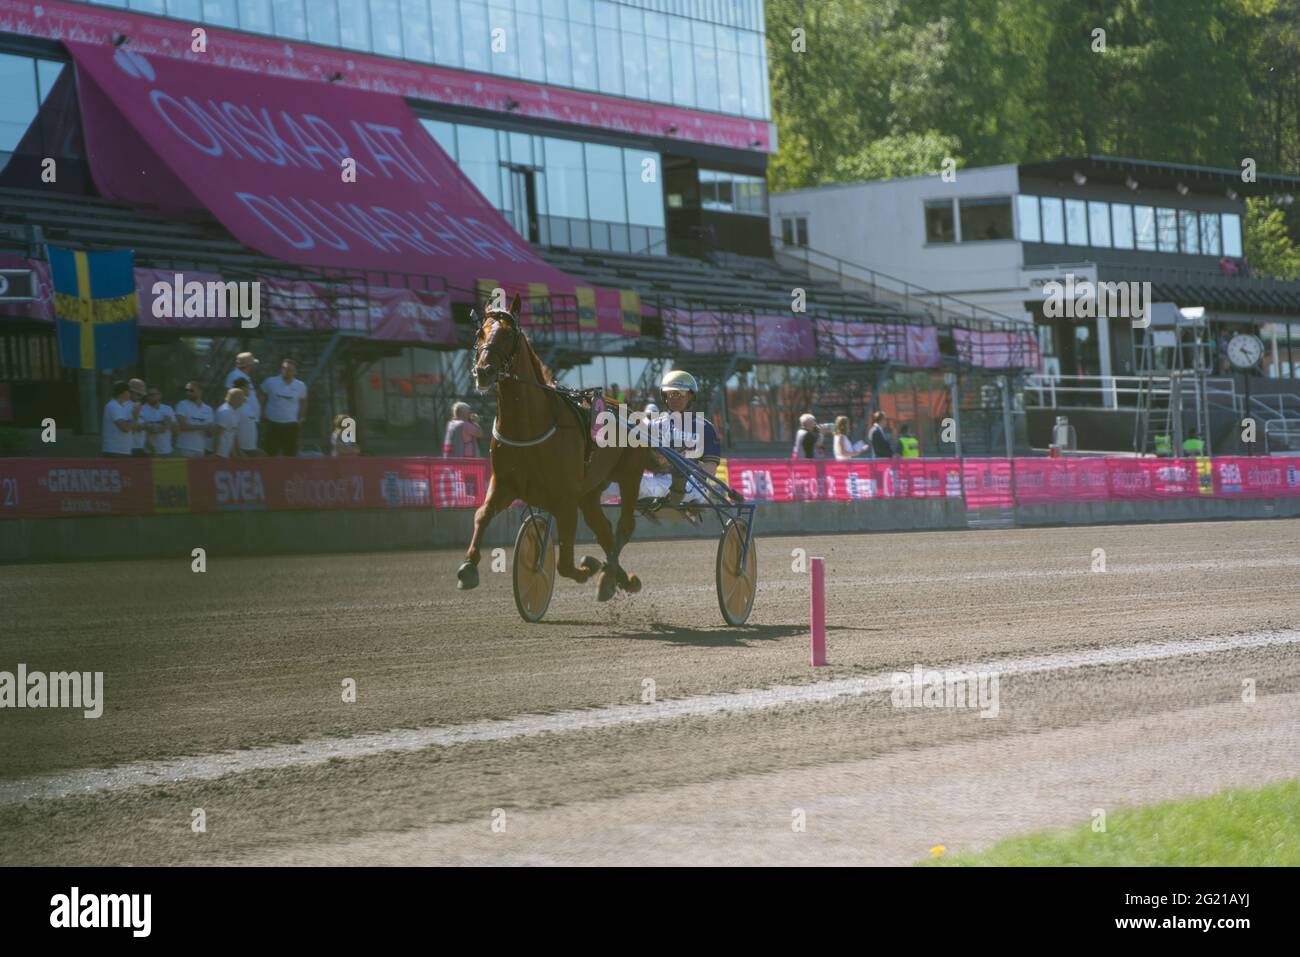 210530 Solvalla - Elitloppet GELATI CUT with driver Gabriele Gelormini trotting event at Solvalla track in Stockholm Sweden. High quality photo Stock Photo